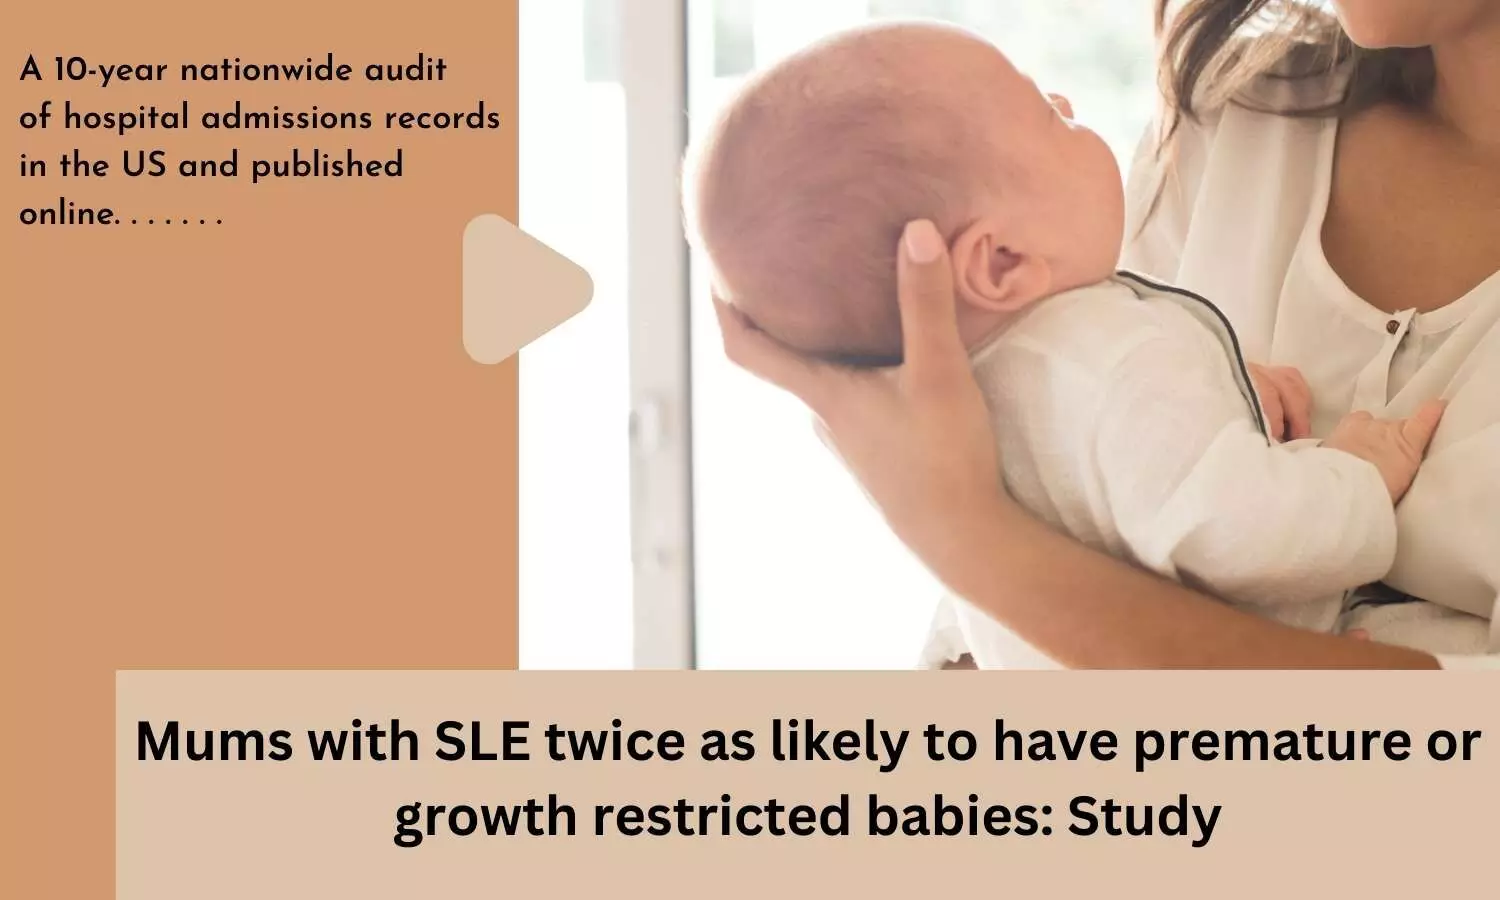 Mums with SLE twice as likely to have premature or growth restricted babies: Study